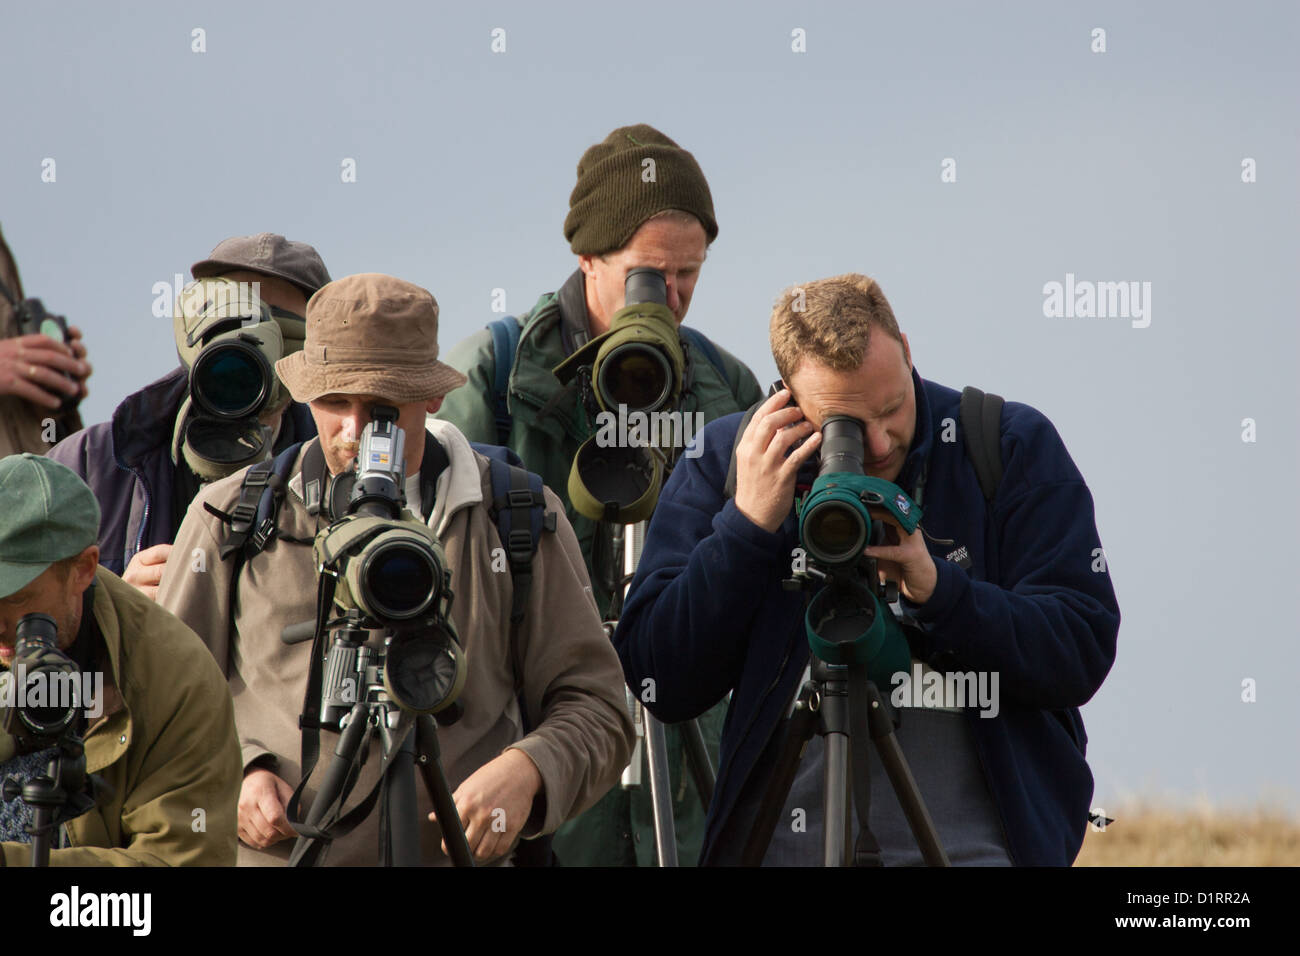 Birdwatchers / Twitchers watching Britain's first-ever Chestnut-eared Bunting on Fair Isle, Shetland, Scotland in 2004. Stock Photo